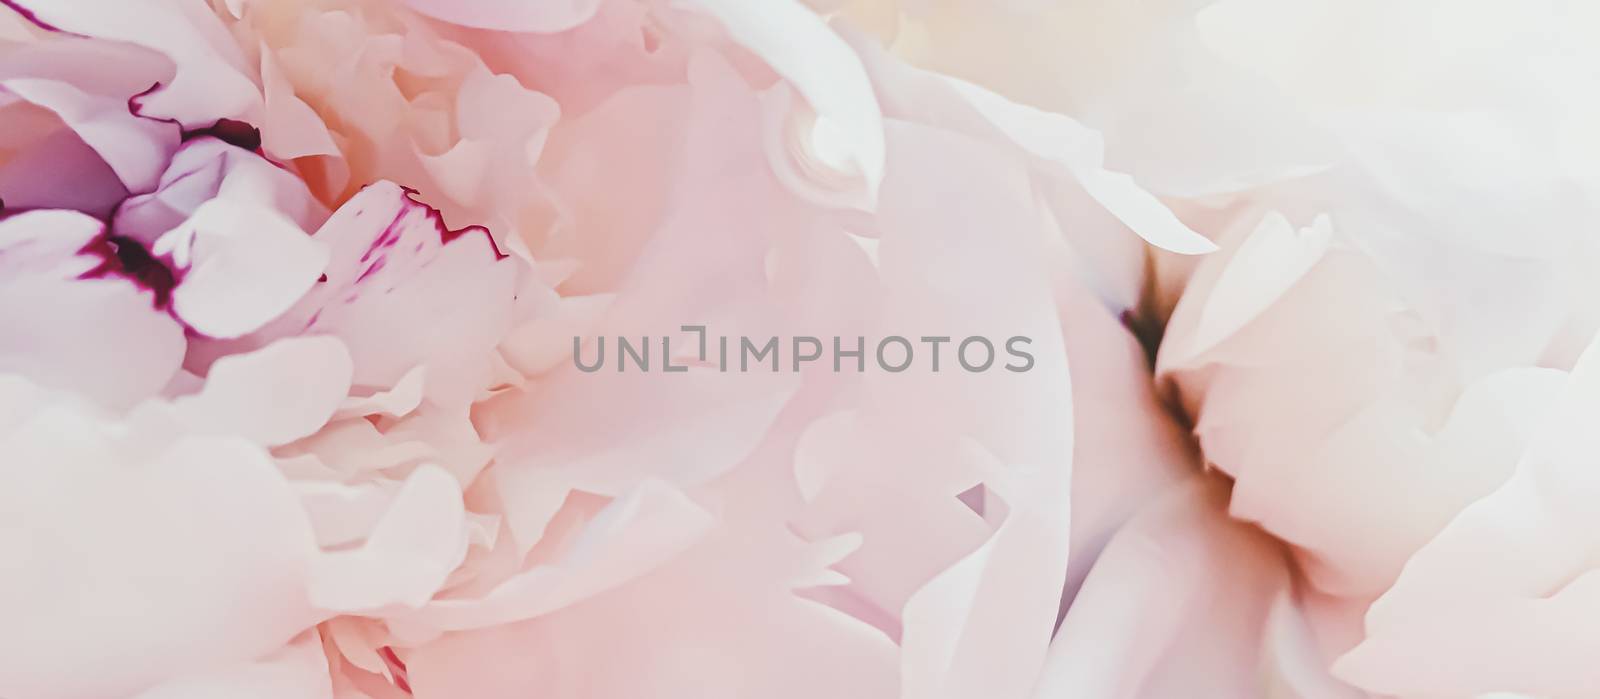 Pink peony flower as abstract floral background for holiday branding design